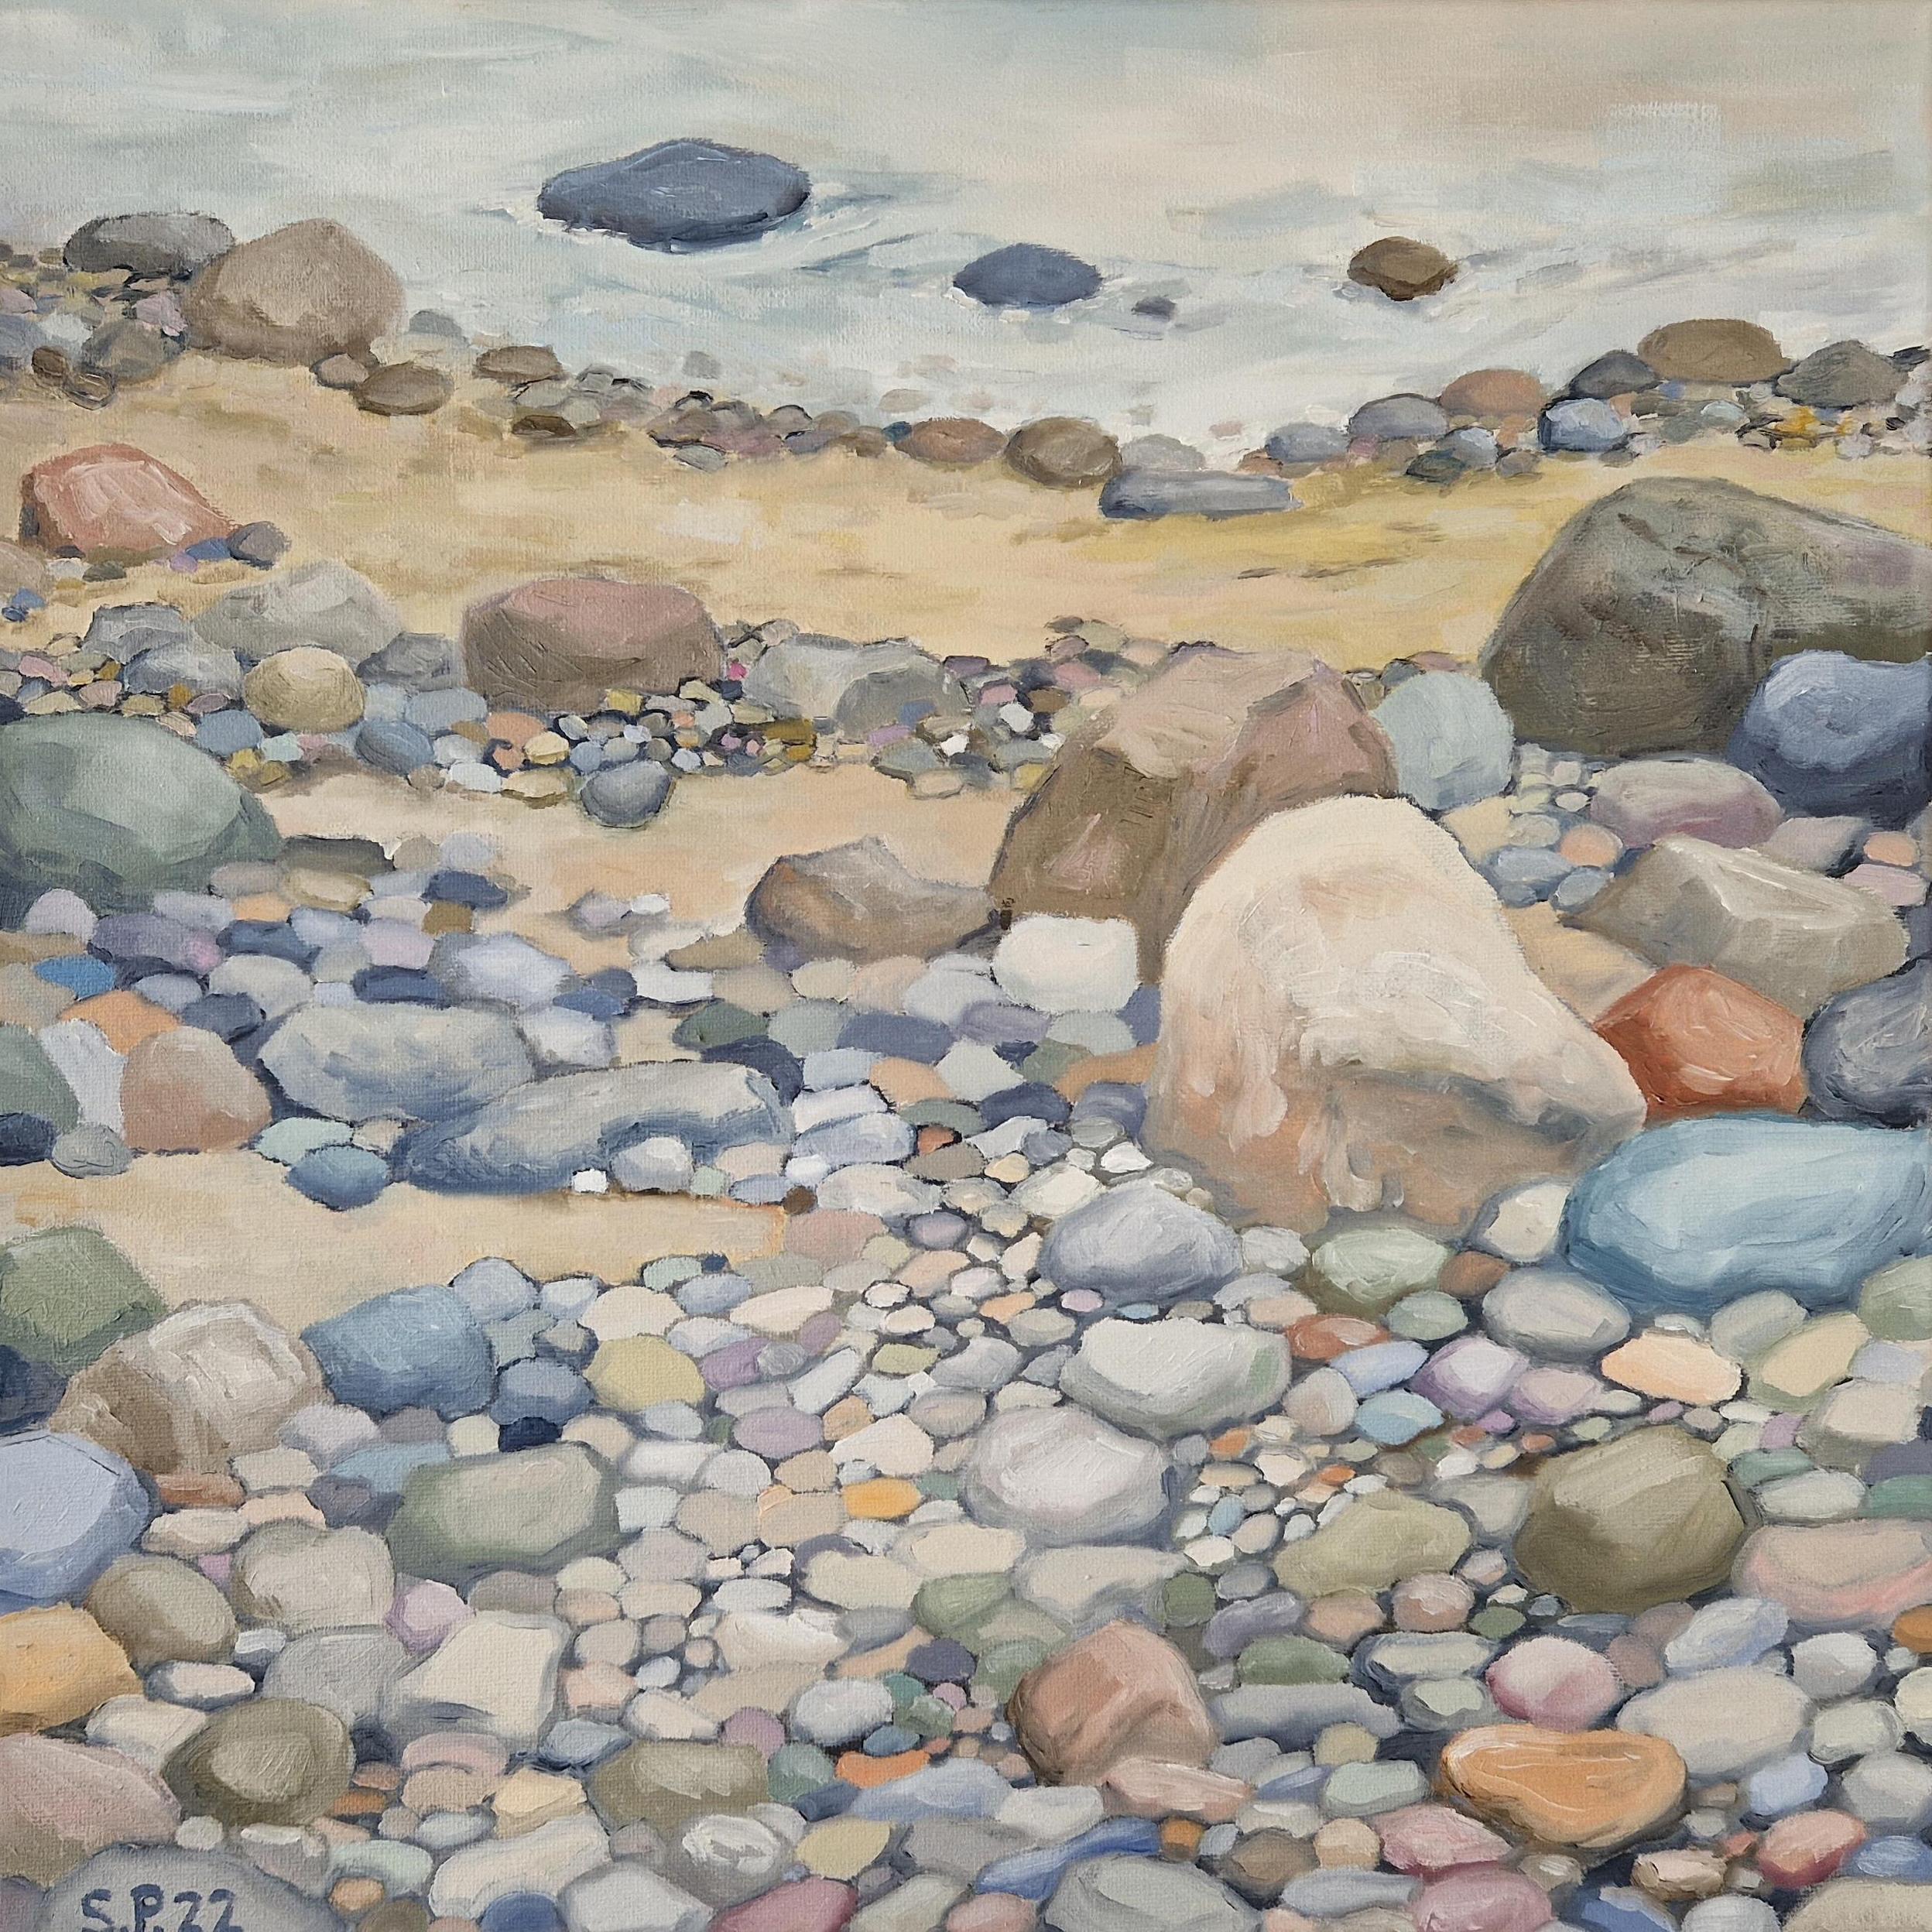 The painting 'Beachparty'.